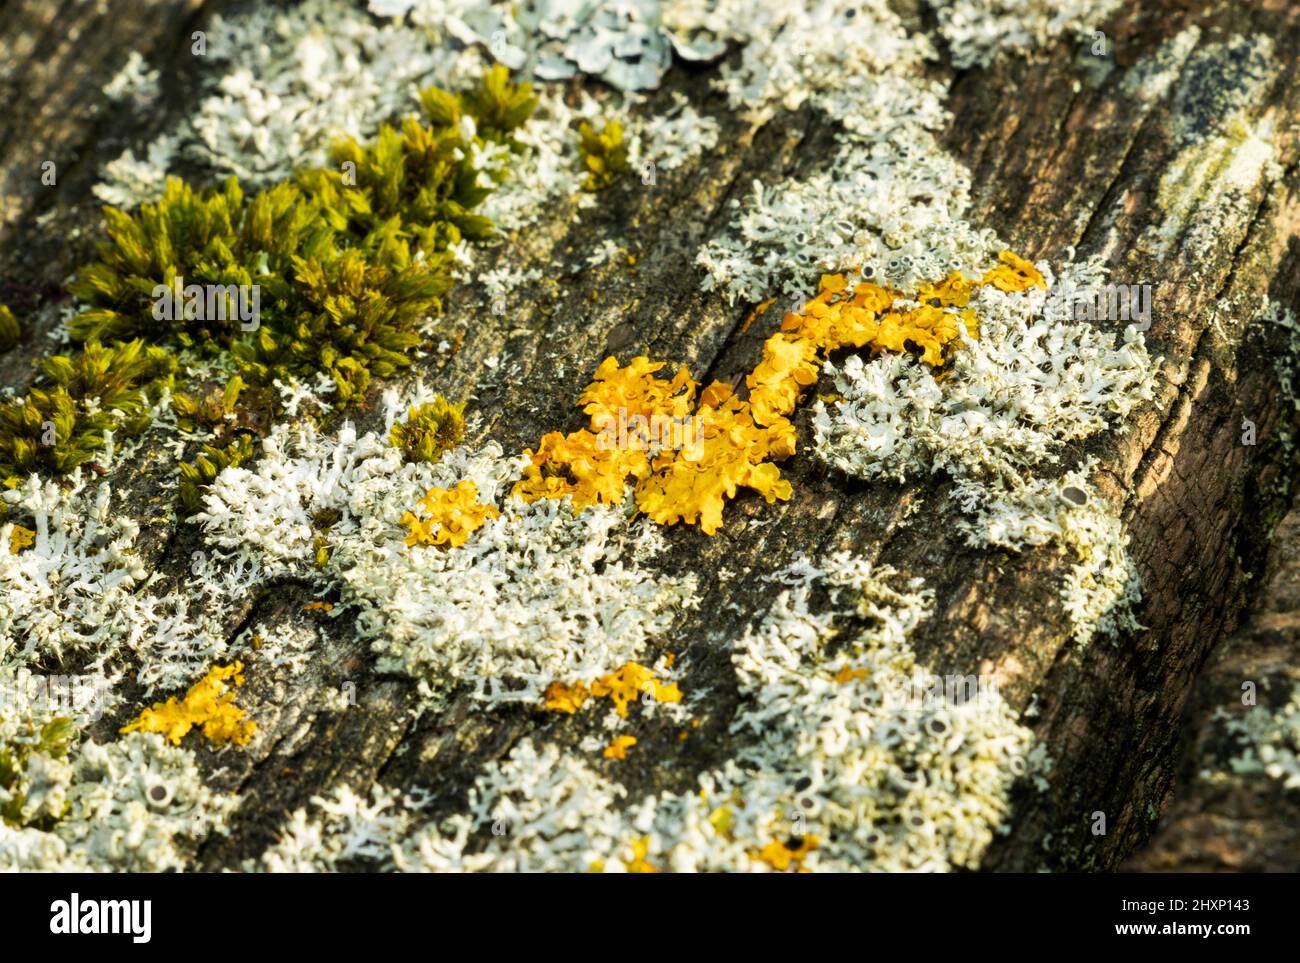 A vivid orange patch of Golden Crust lichen grows in the profusion of feather-moss and rosette lichens on an old wooden hand rail. Stock Photo